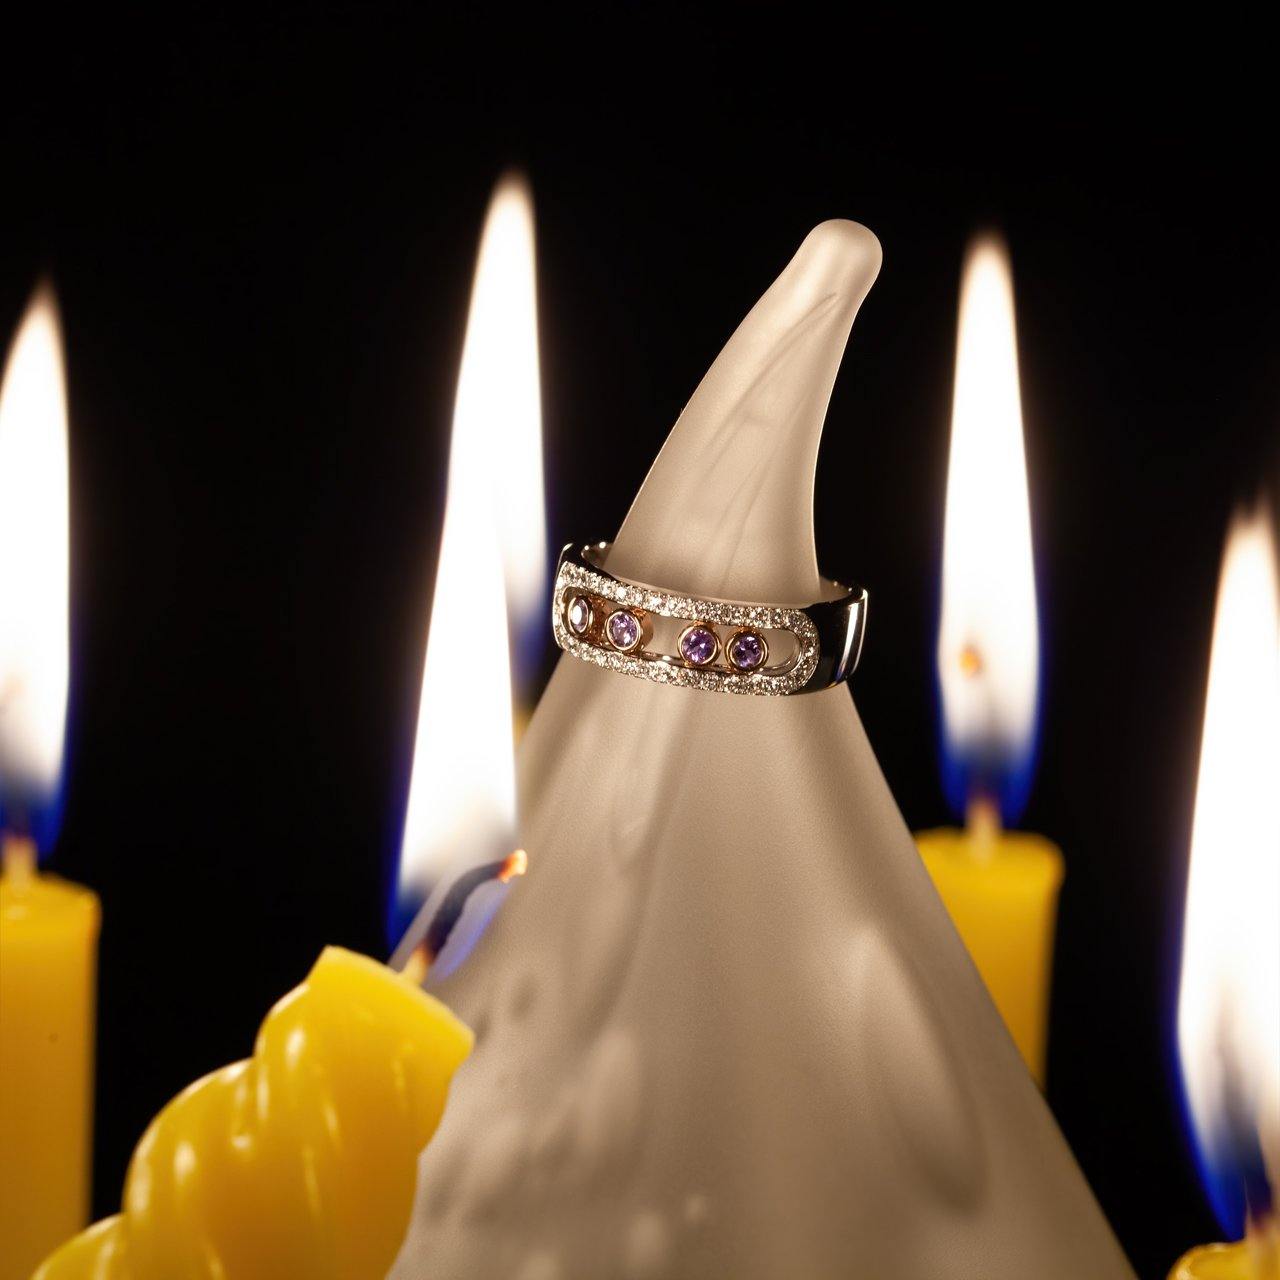 0.22ct natural alexandrite ring on 18k white and rose gold setting displayed on a candle